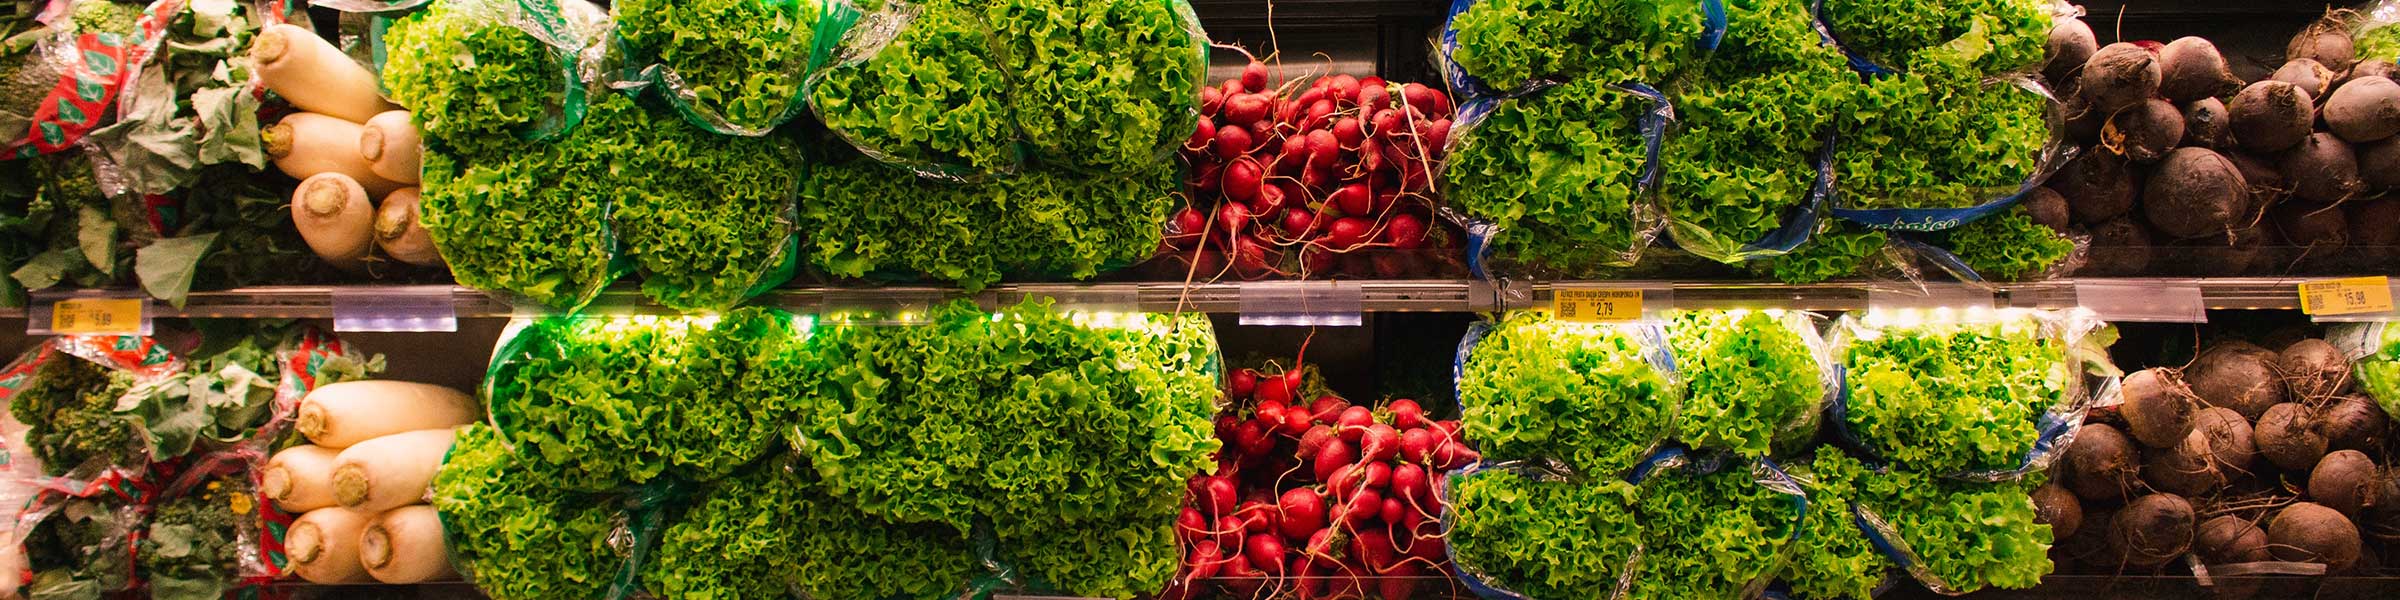 3 things supermarkets need to succeed in an omnichannel world